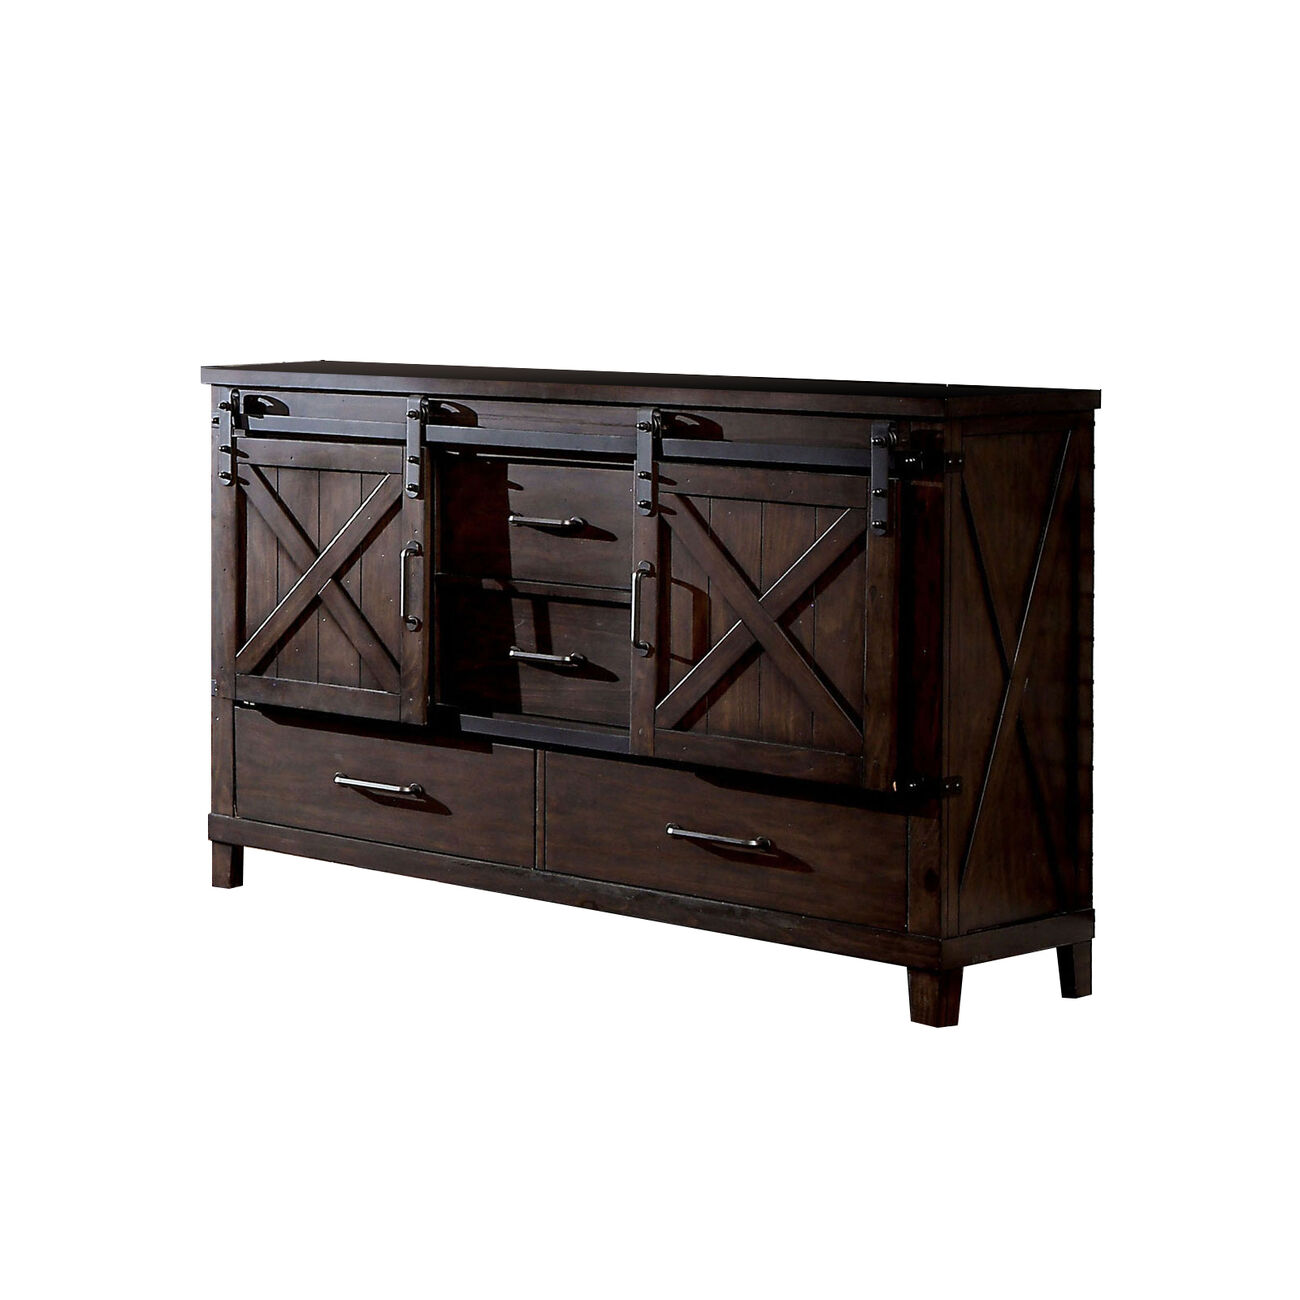 Farmhouse Wood and Metal Dresser with Sliding Cabinets, Walnut Brown